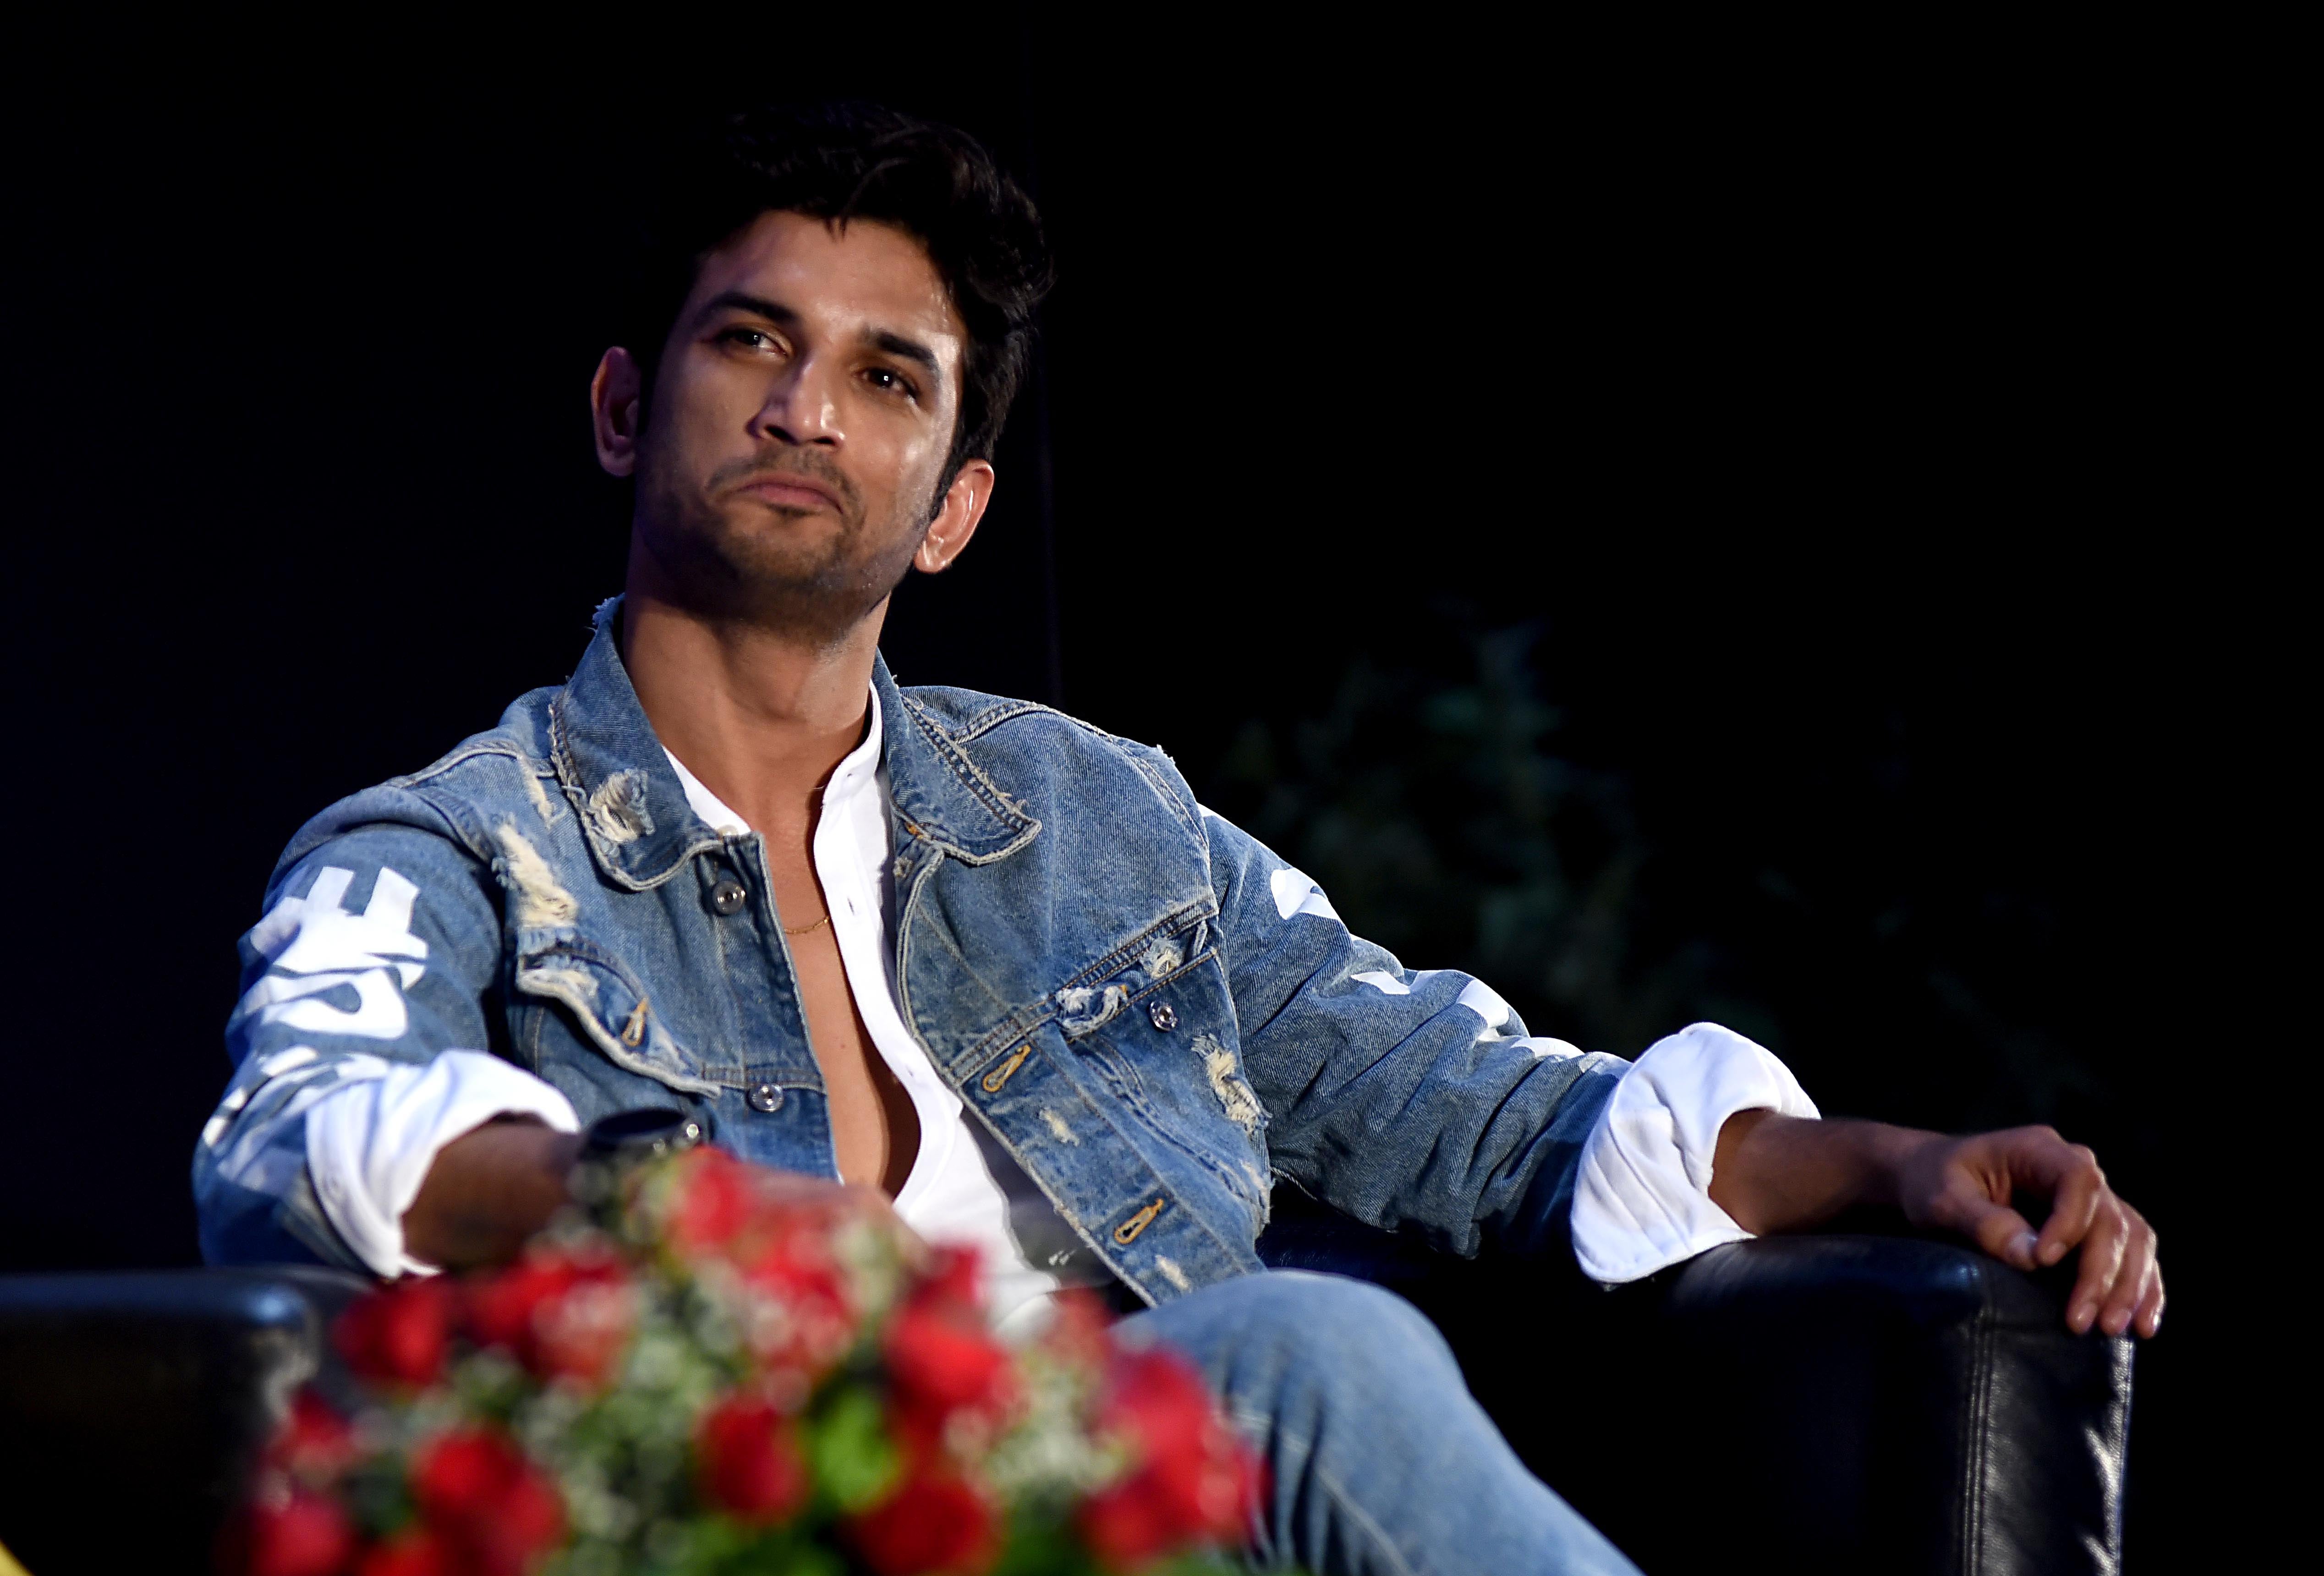 Indian actor Sushant Singh Rajput, seen here in a photograph taken in April 2019, was seen as a rising star in Bollywood